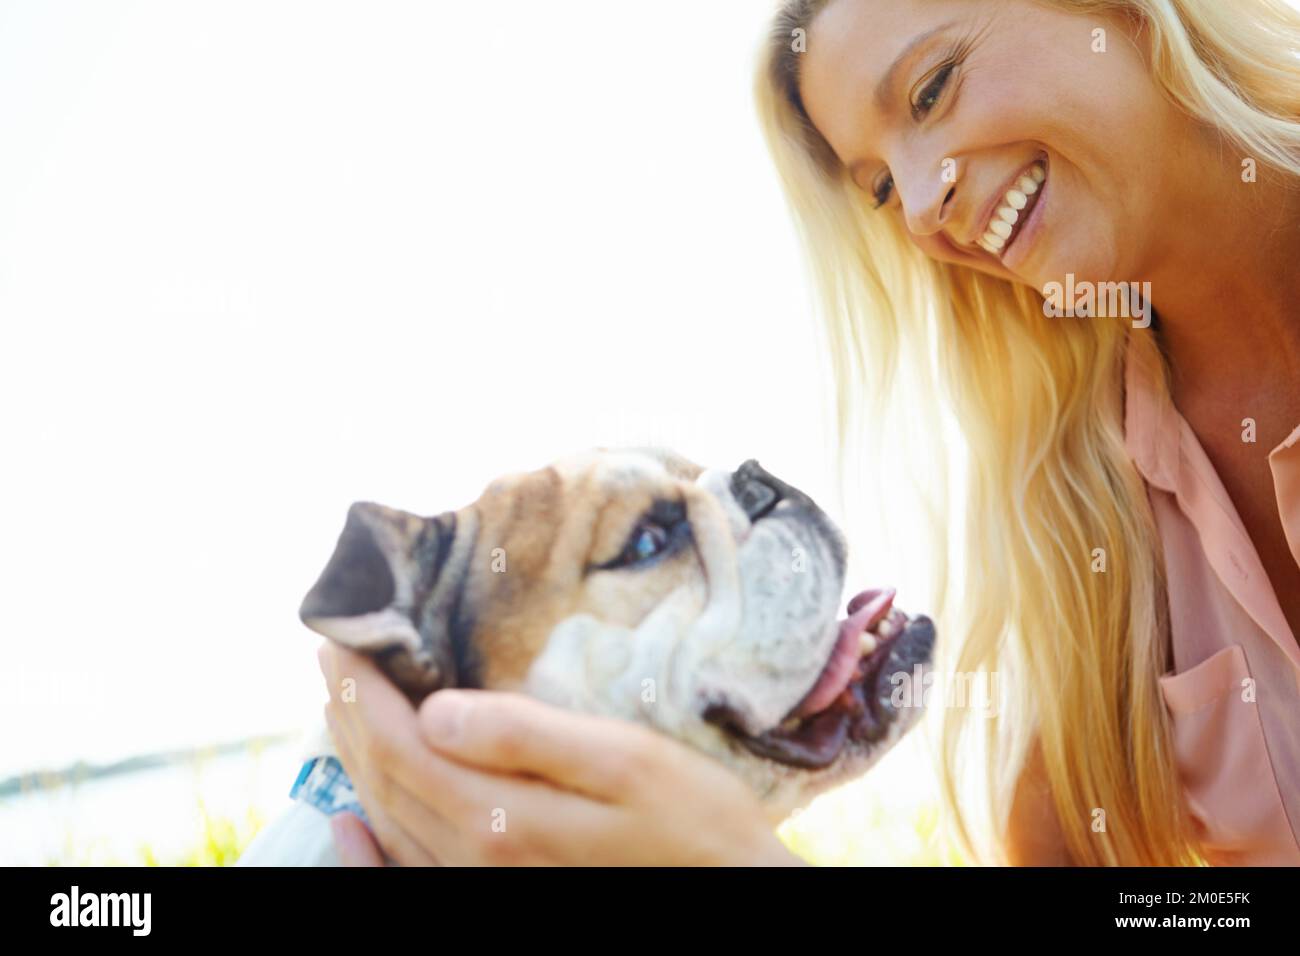 Spending time with my best friend. A happy blonde laughing while playing with her dog outside. Stock Photo